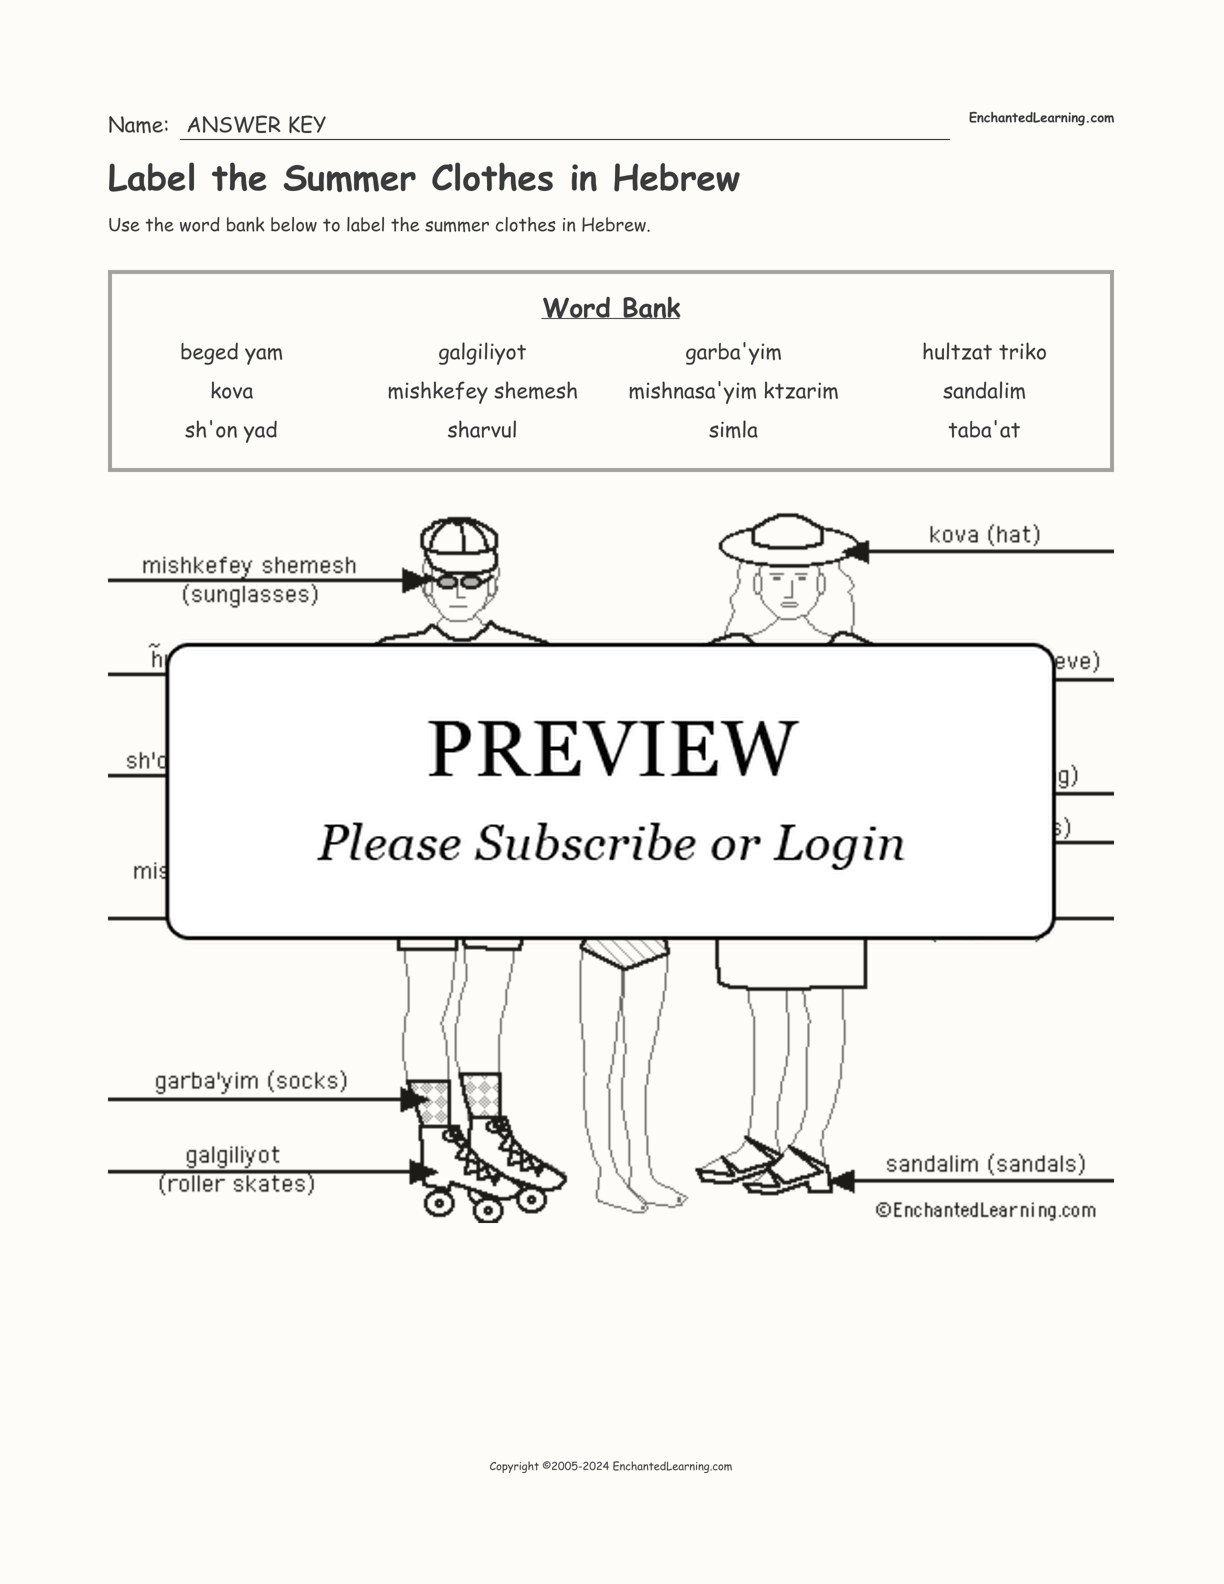 Label the Summer Clothes in Hebrew interactive worksheet page 2